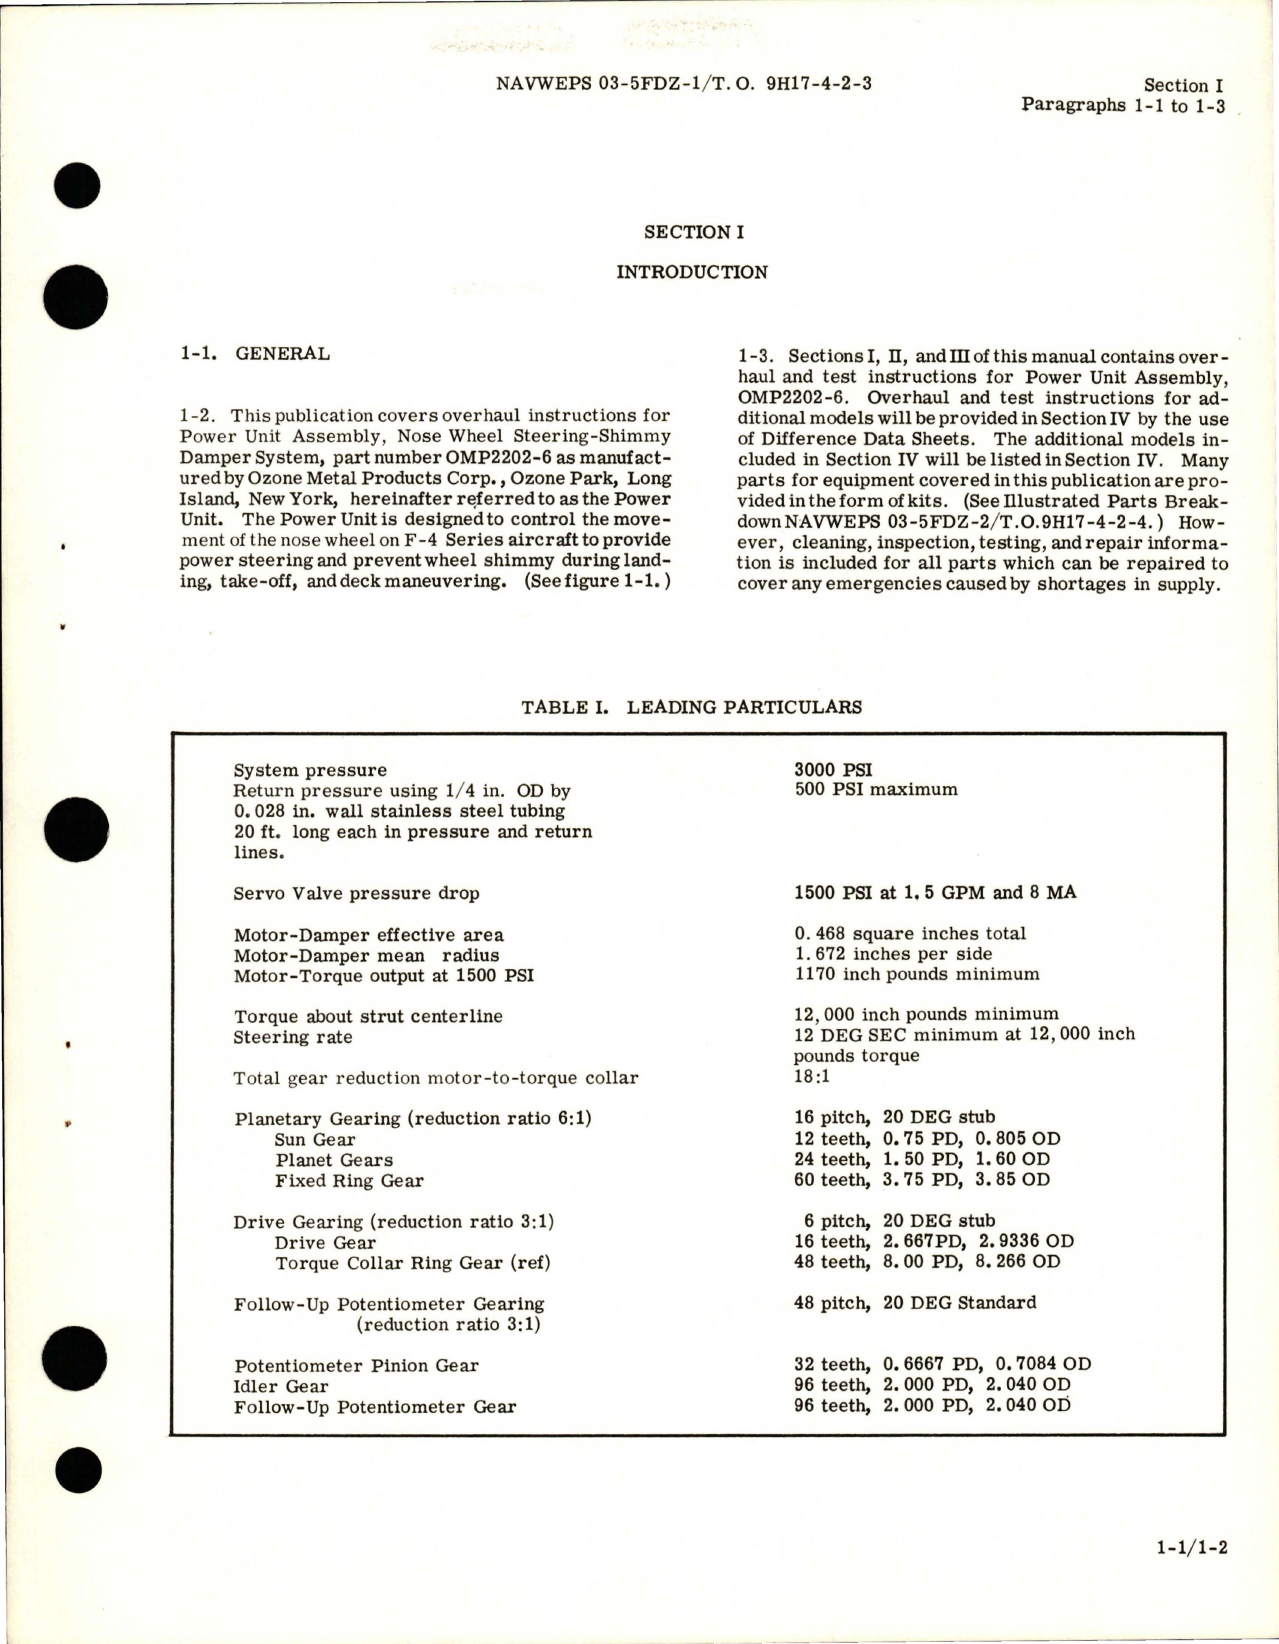 Sample page 5 from AirCorps Library document: Overhaul Instructions for Power Unit Assembly, Nose Wheel Steering Shimmy Damper System - Part OMP2202-6